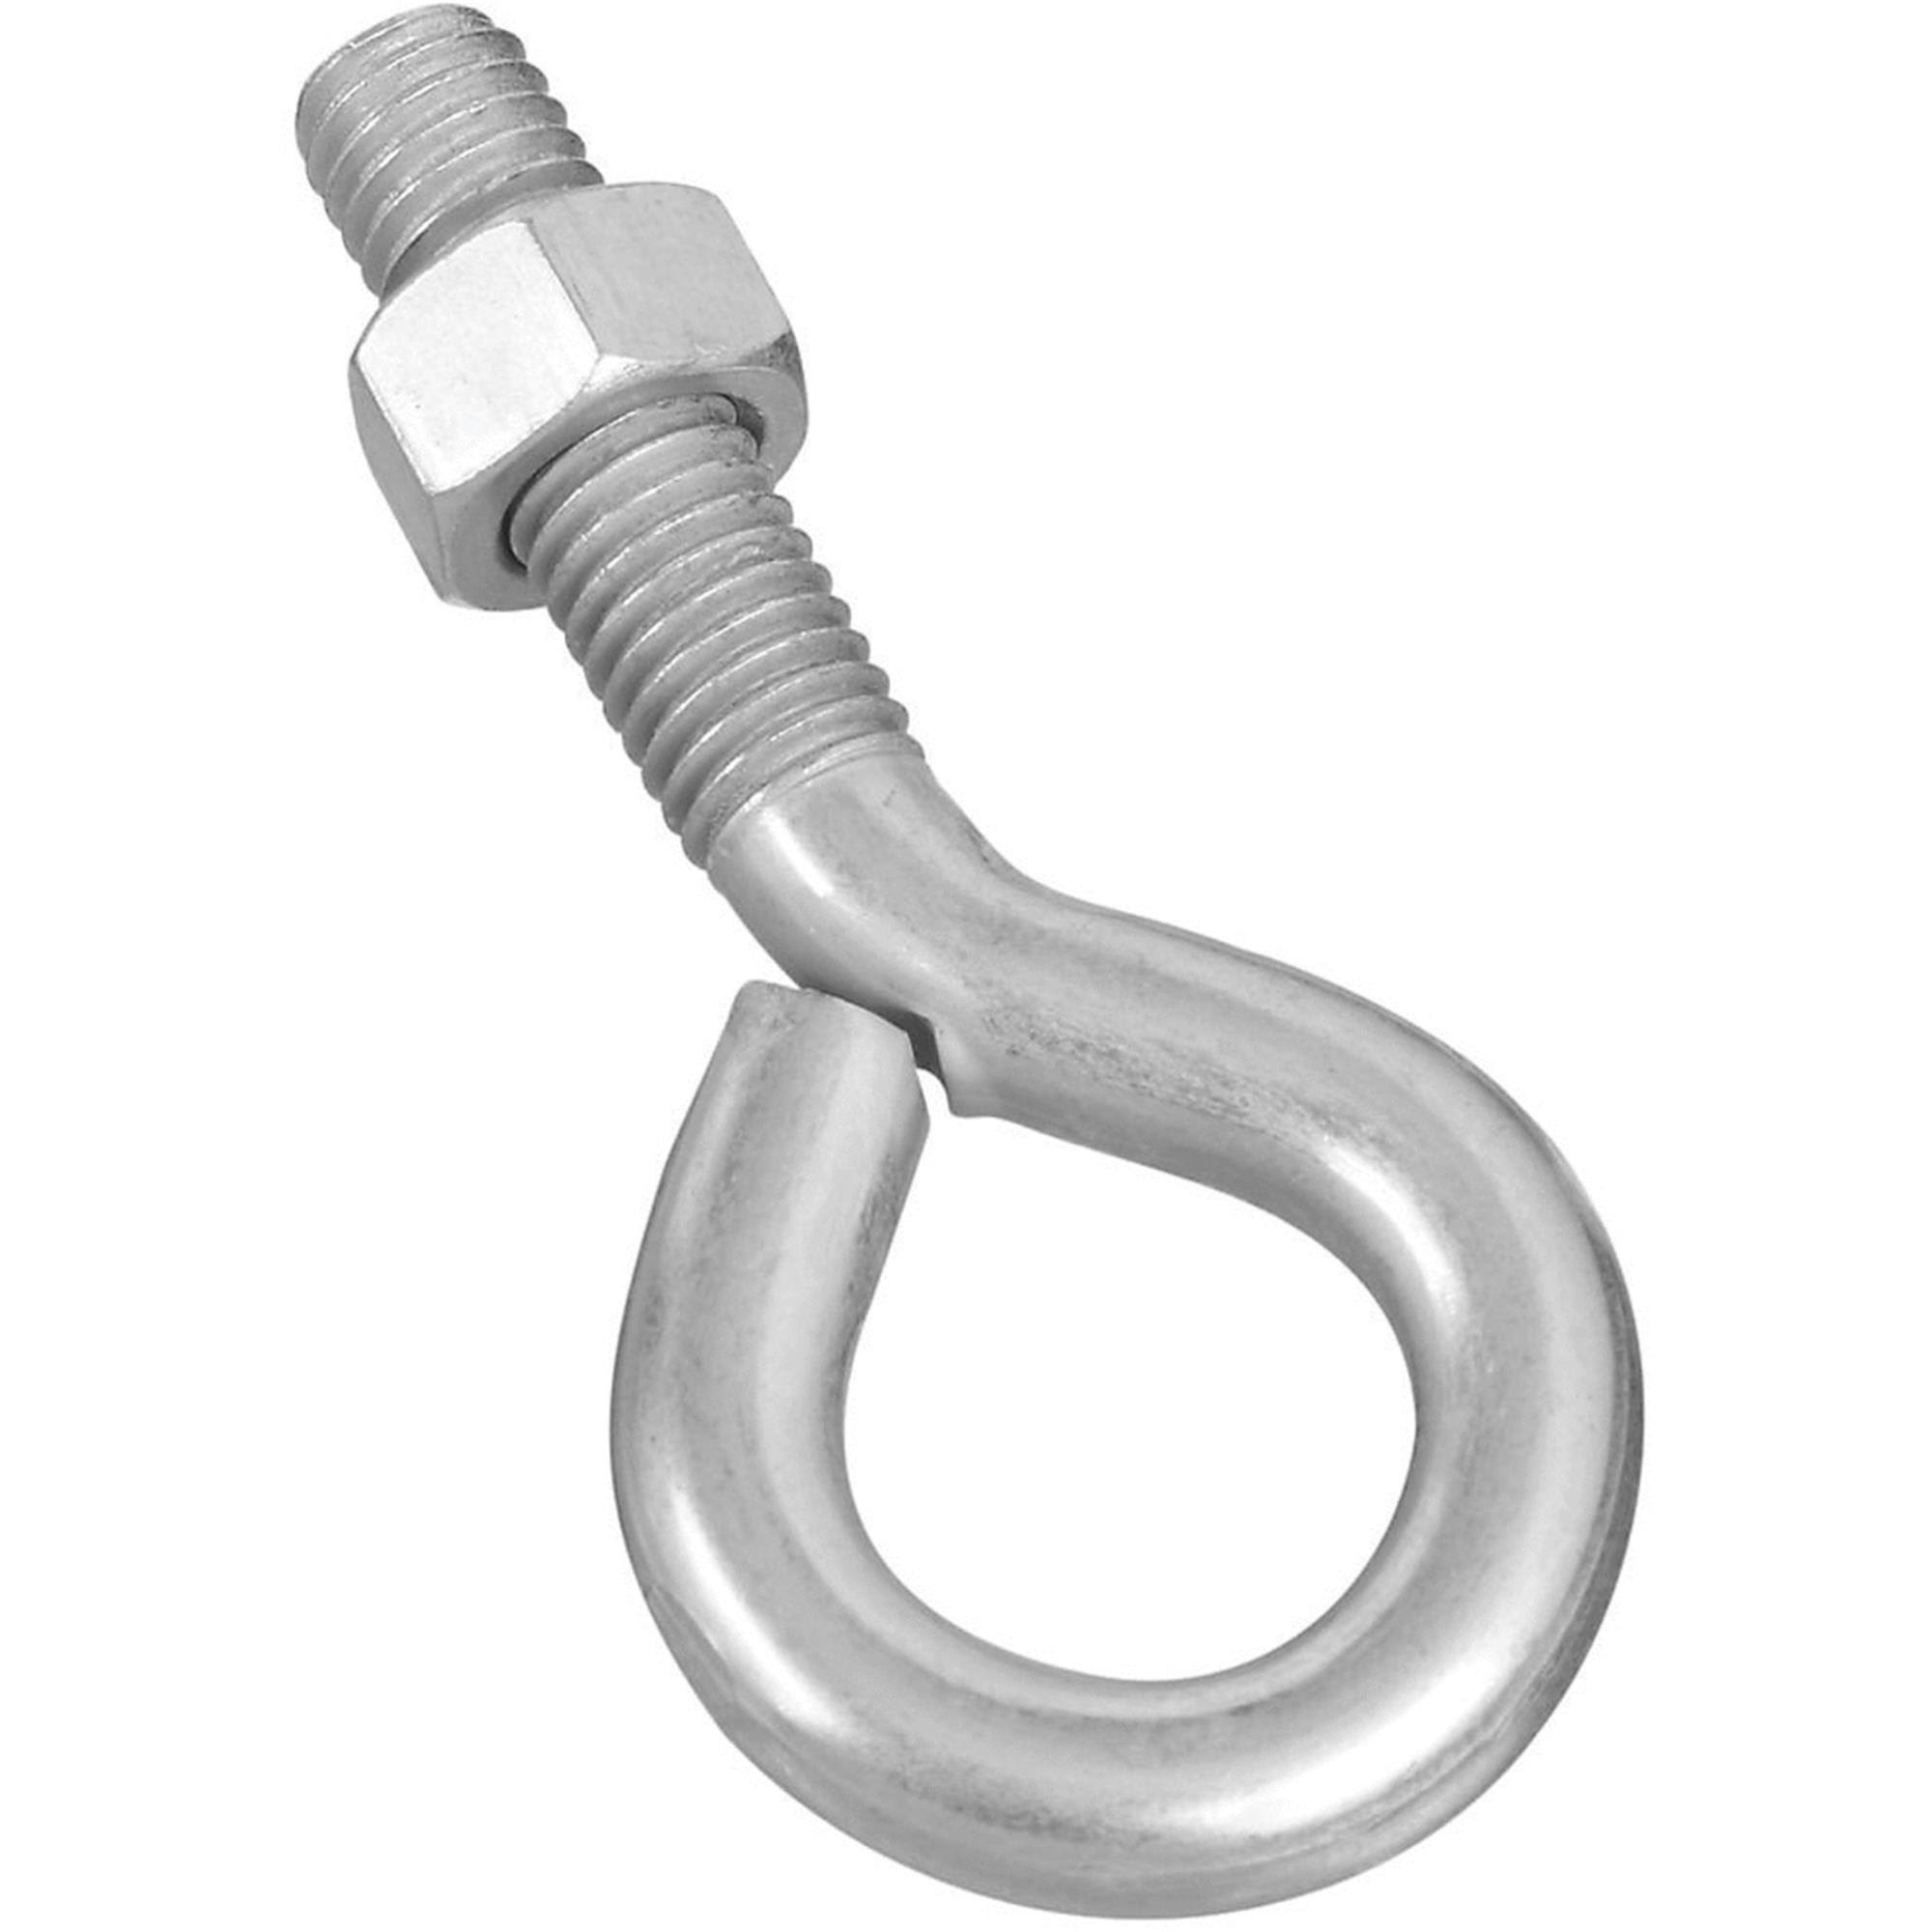 National Hardware Zinc Plated Eye Bolt - with Hex Nut, 1/2" x 4"